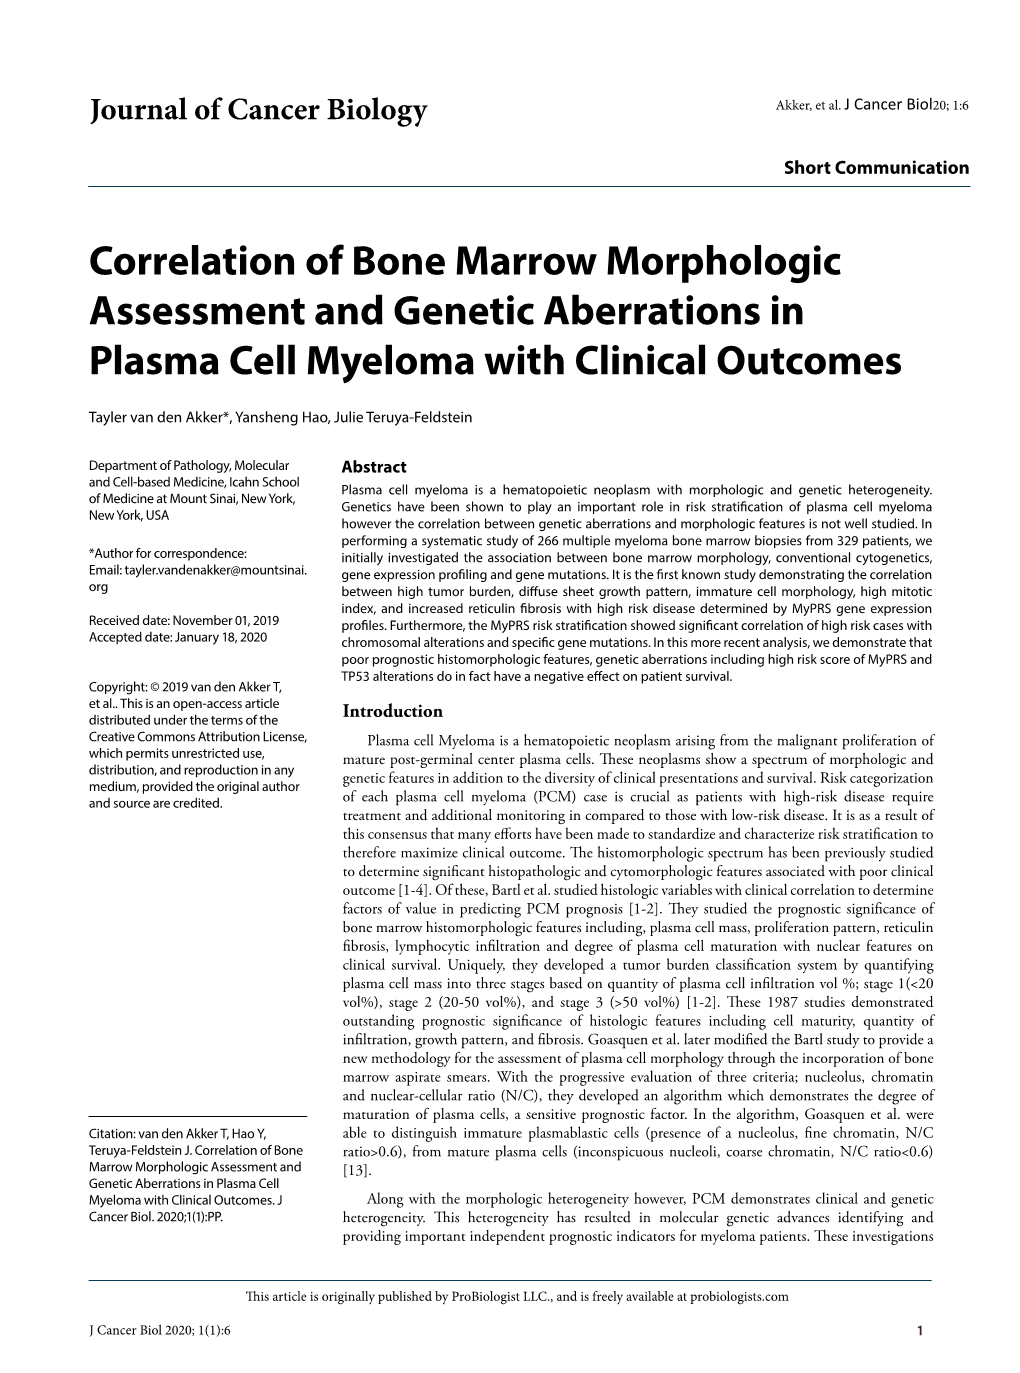 Correlation of Bone Marrow Morphologic Assessment and Genetic Aberrations in Plasma Cell Myeloma with Clinical Outcomes